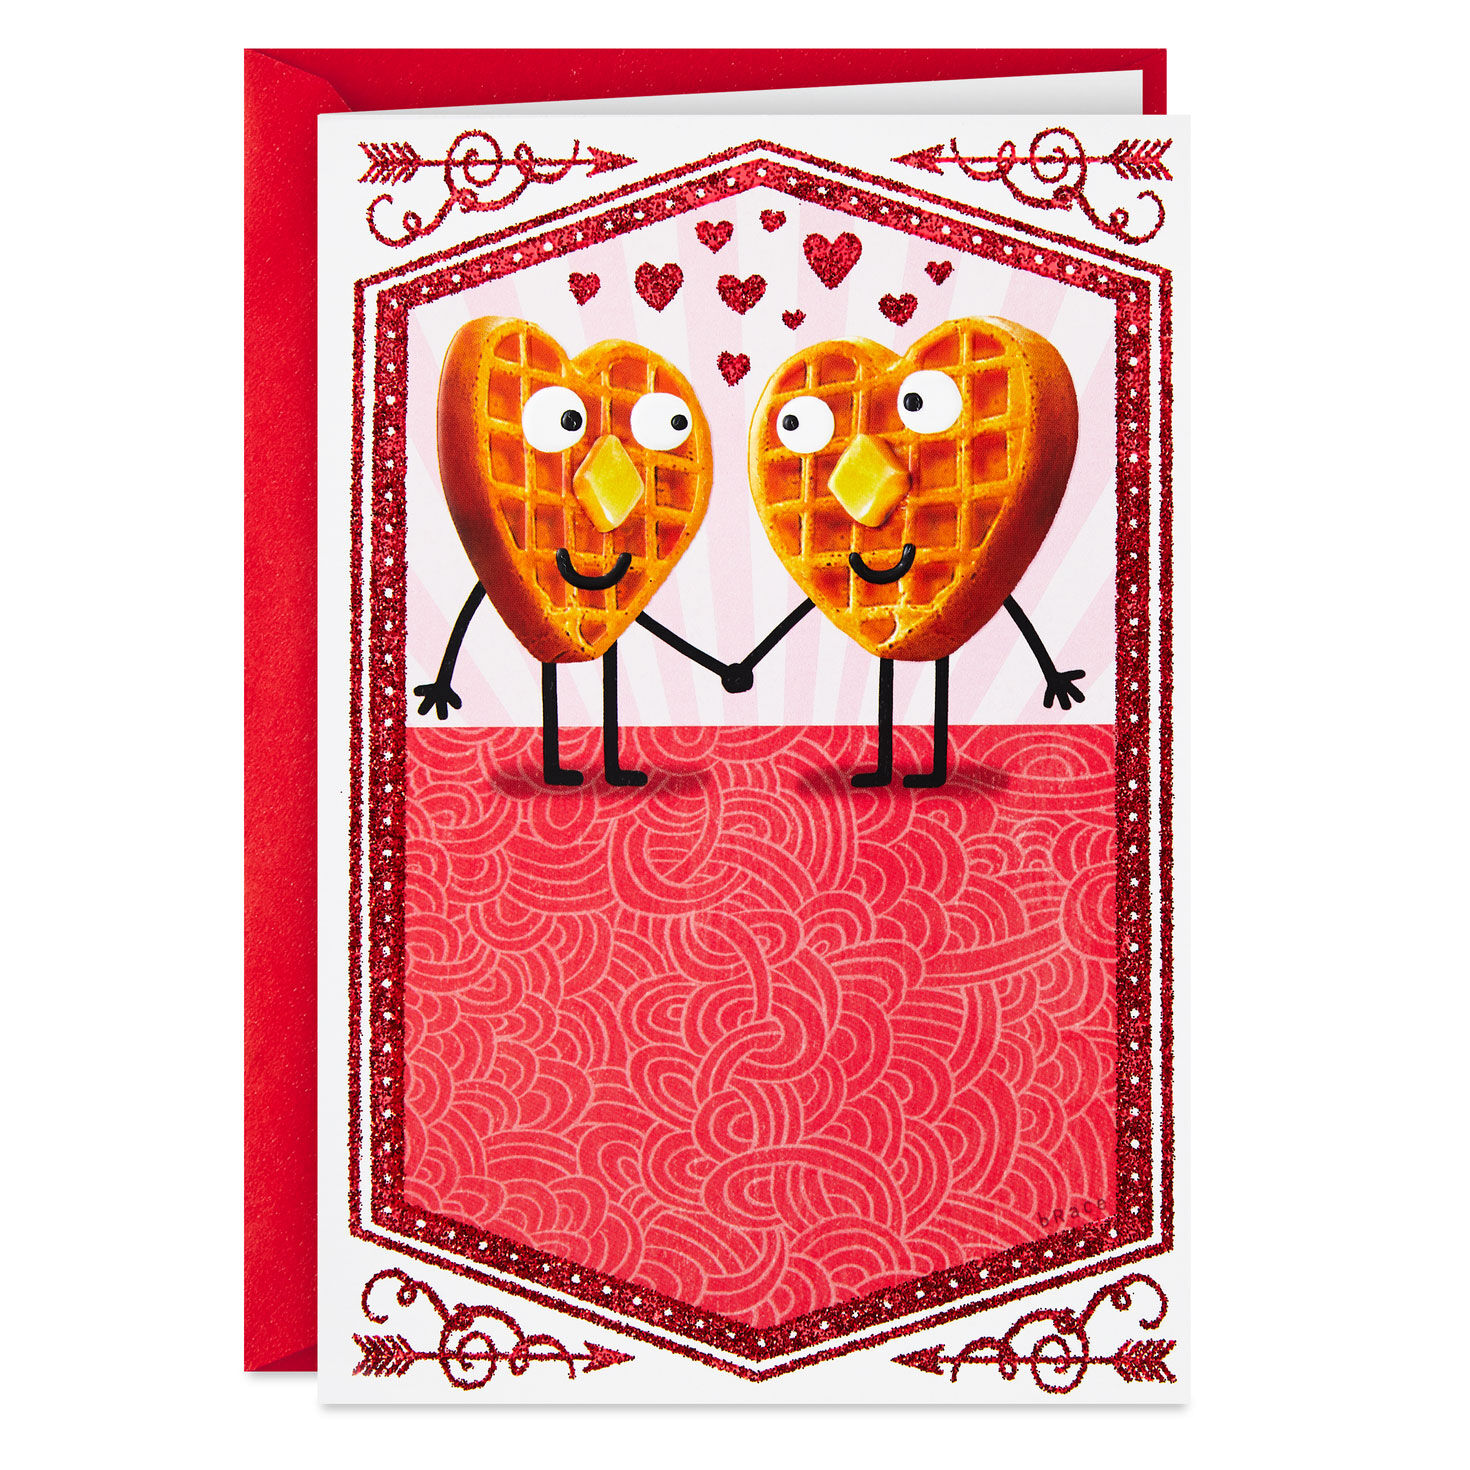 Waffles Joke Anniversary Card or Love Card for Significant Other Hallmark Shoebox Funny Valentines Day Card 